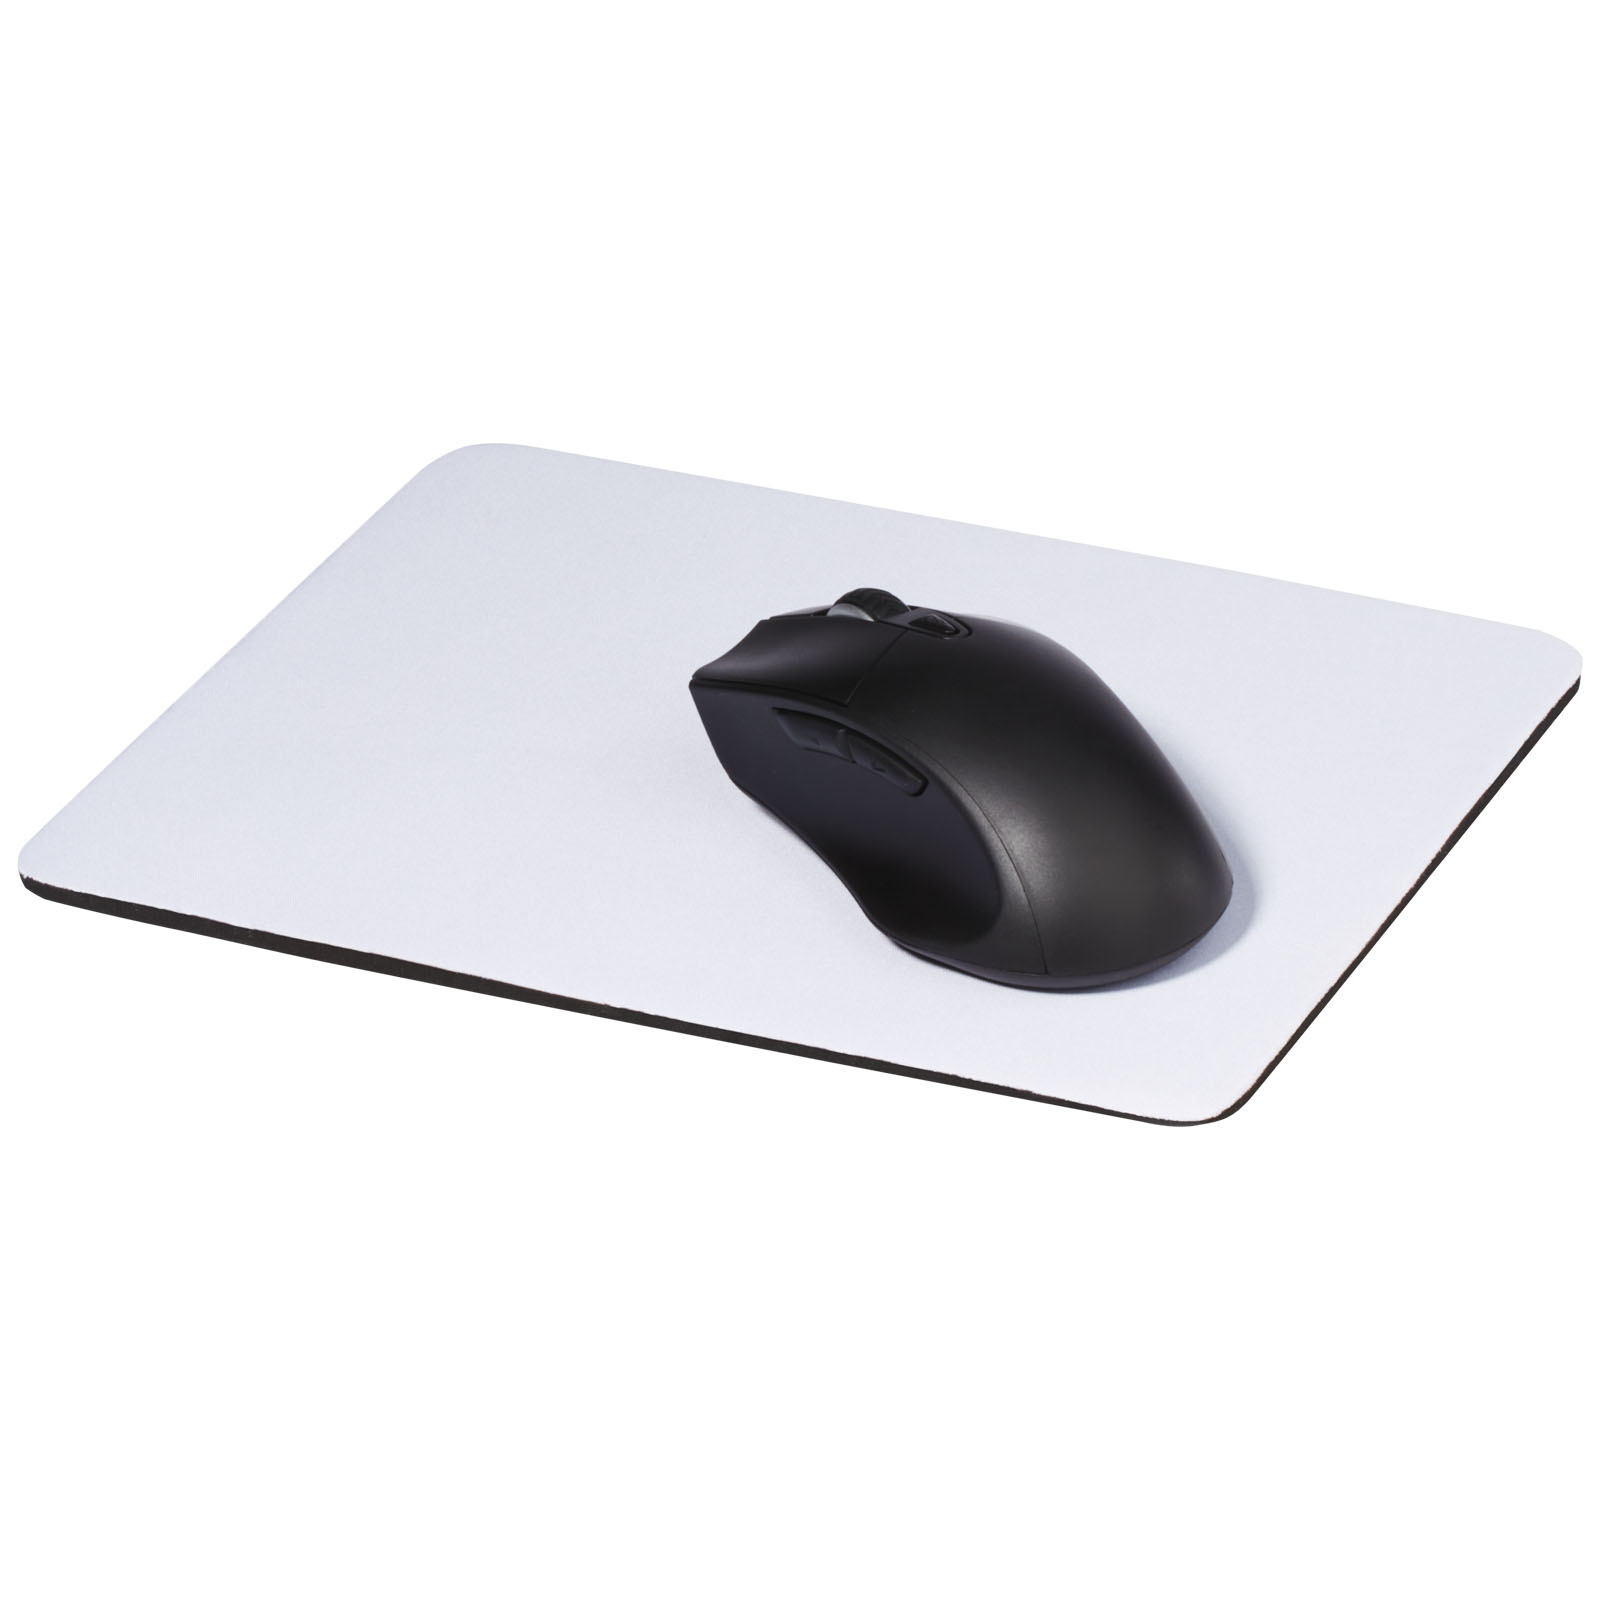 Advertising Computer Accessories - Pure mouse pad with antibacterial additive - 3